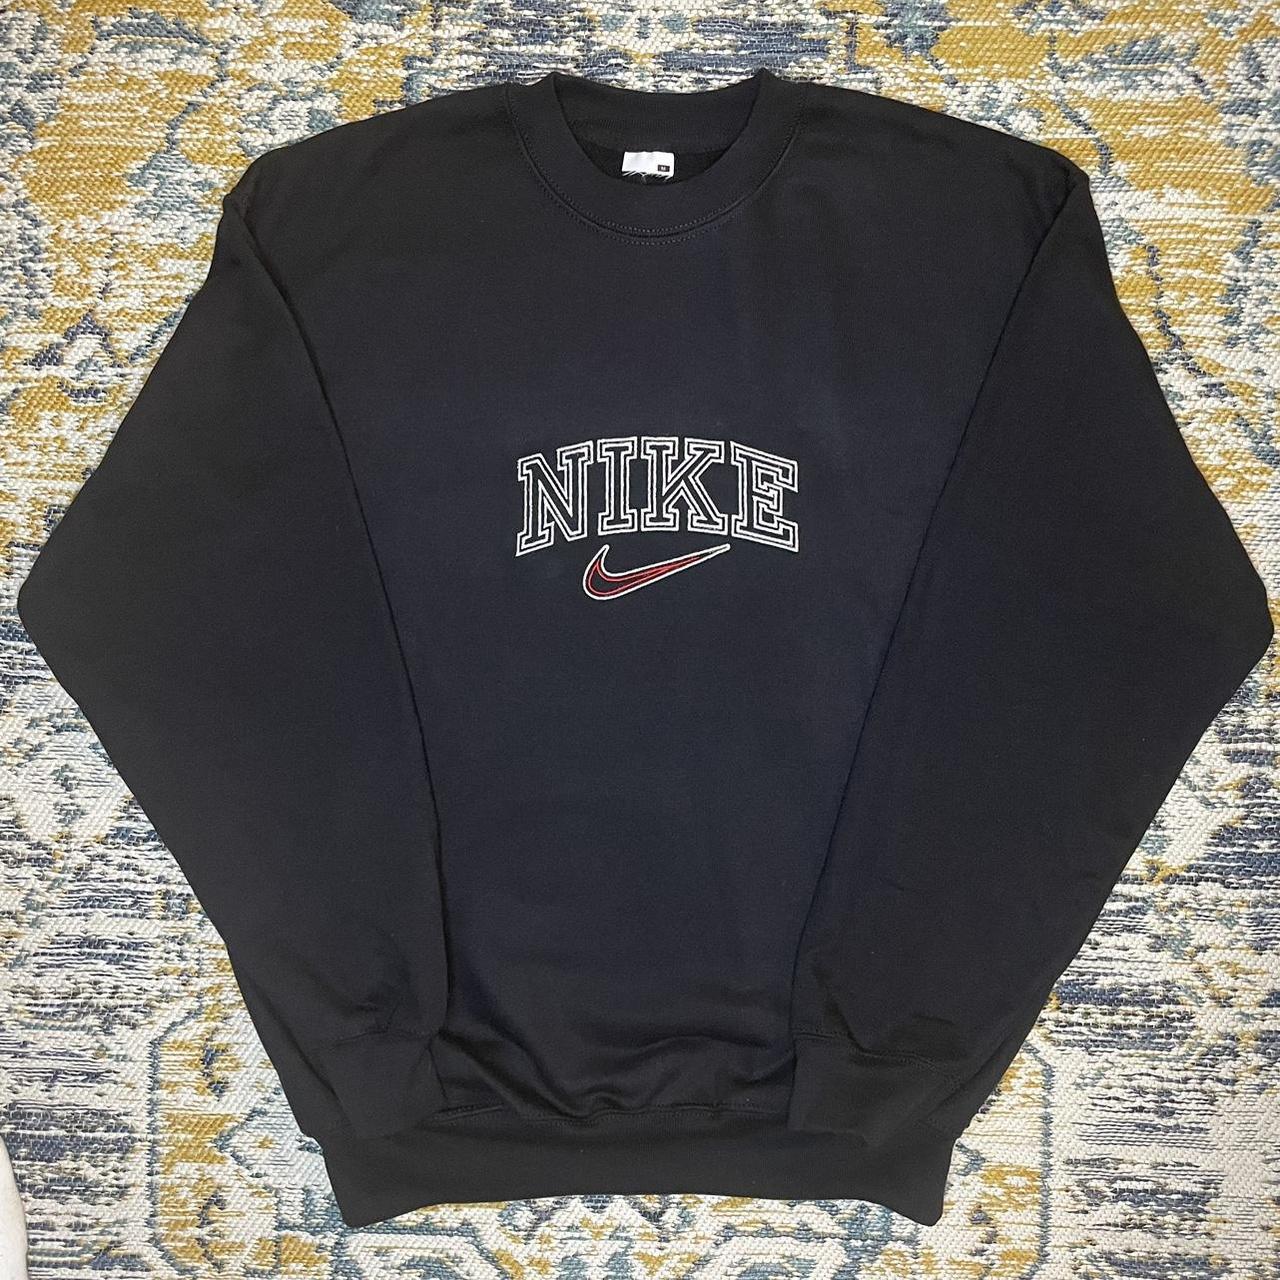 Vintage 90s Inspired Embroidered Sweater #nike... - Depop